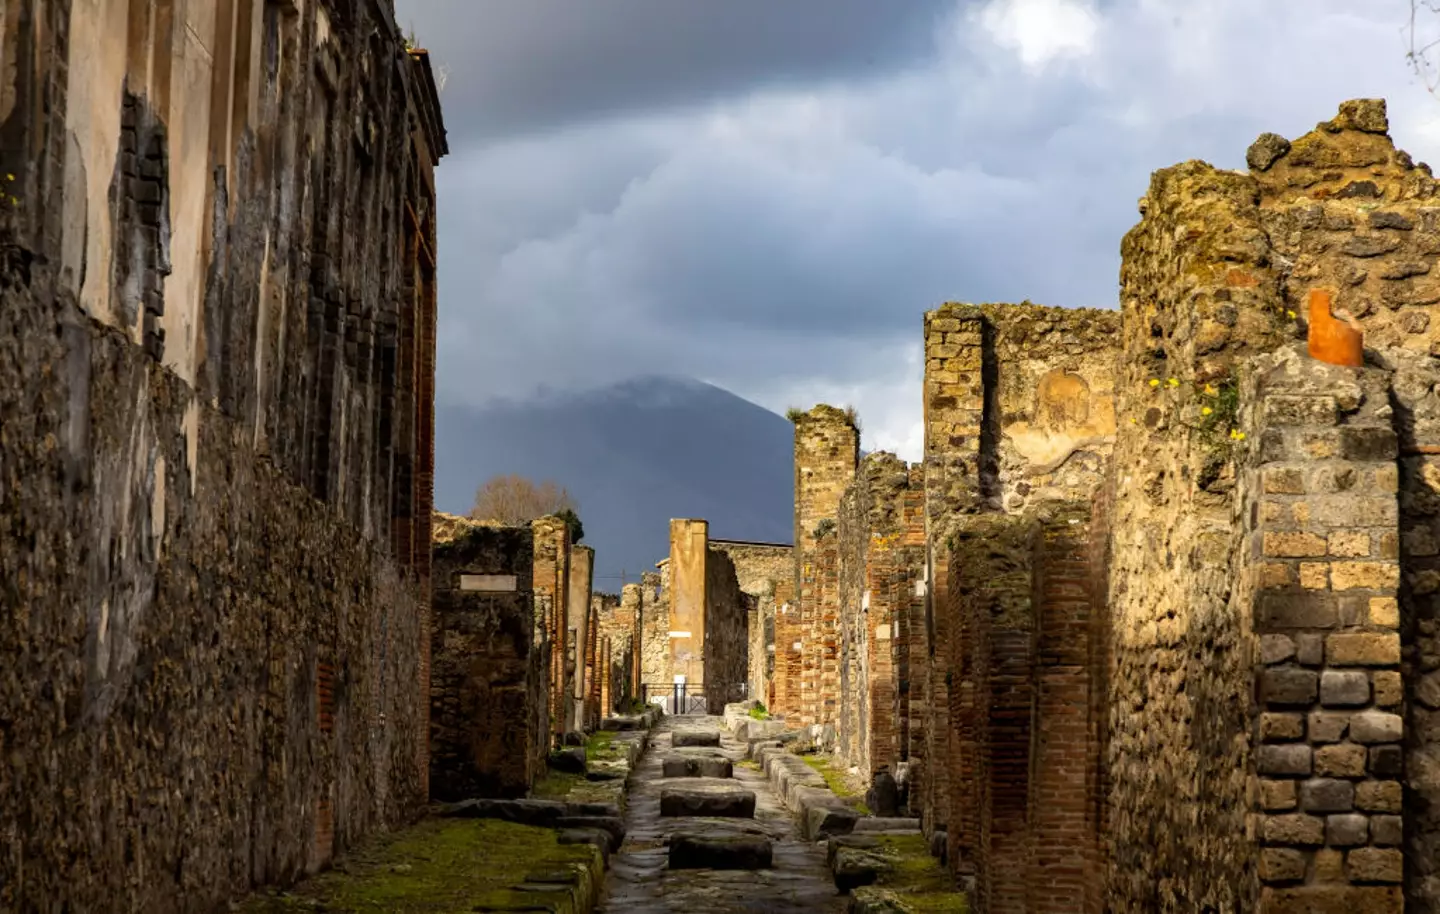 Pompeii is a popular tourist spot, but many who take something as a souvenir end up returning it.